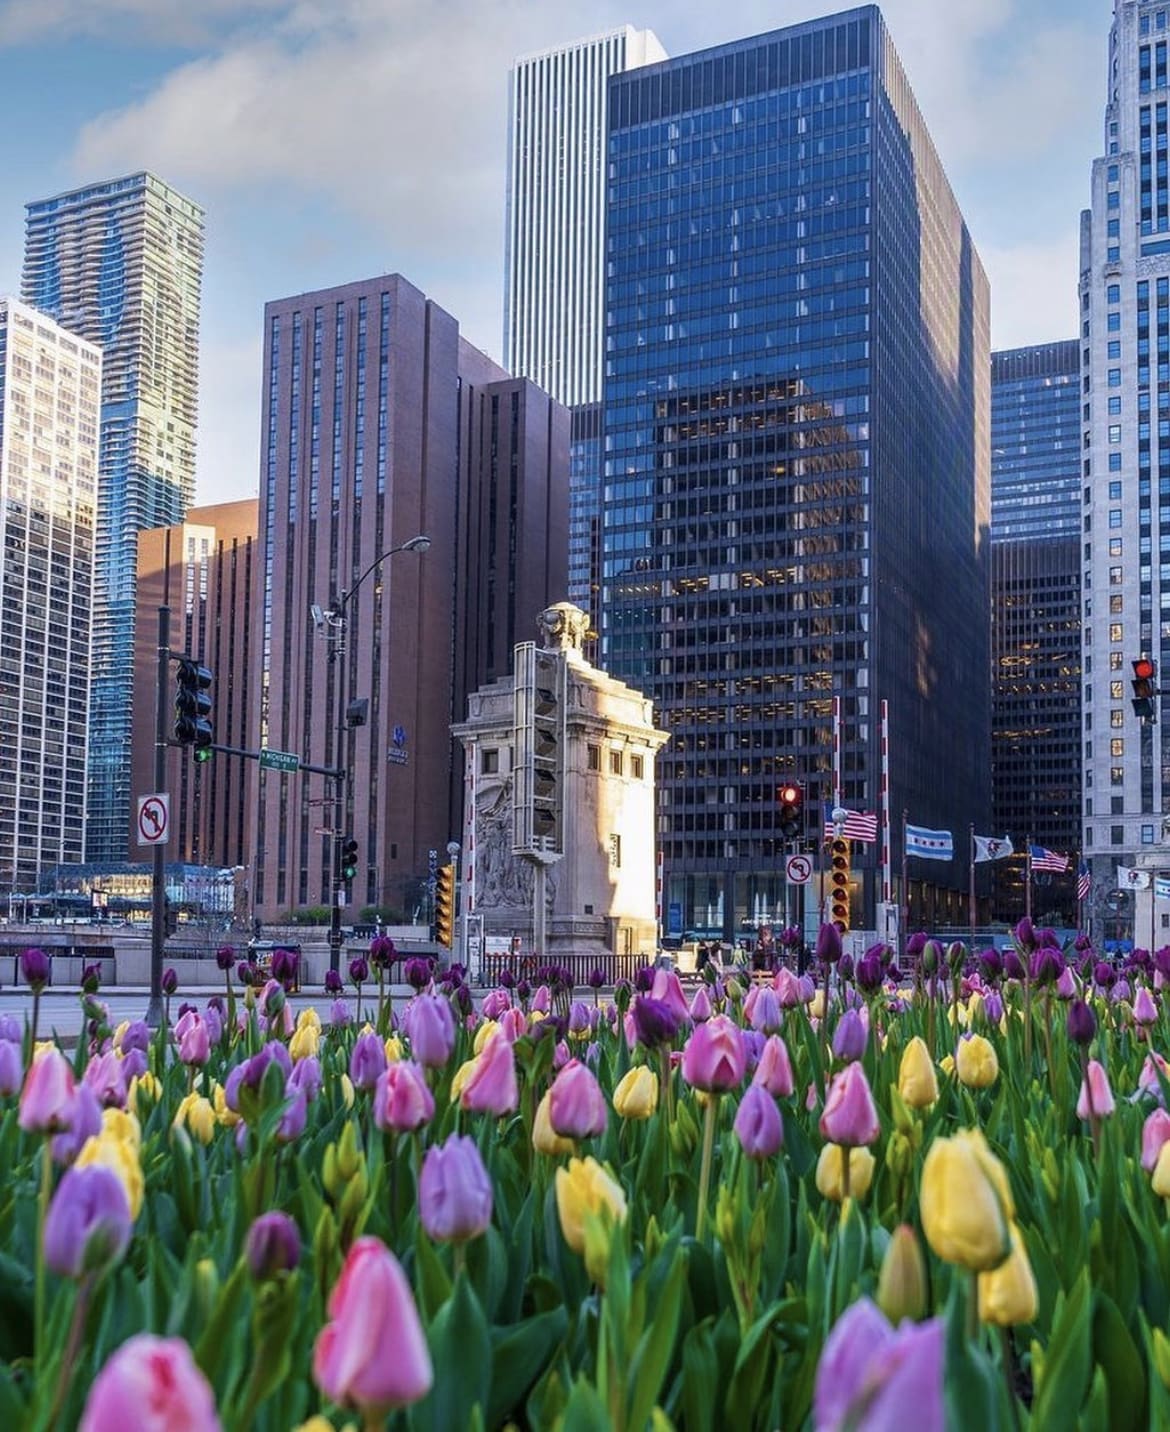 Tulips bloom as spring starts in the city - The Weather in Chicago, US